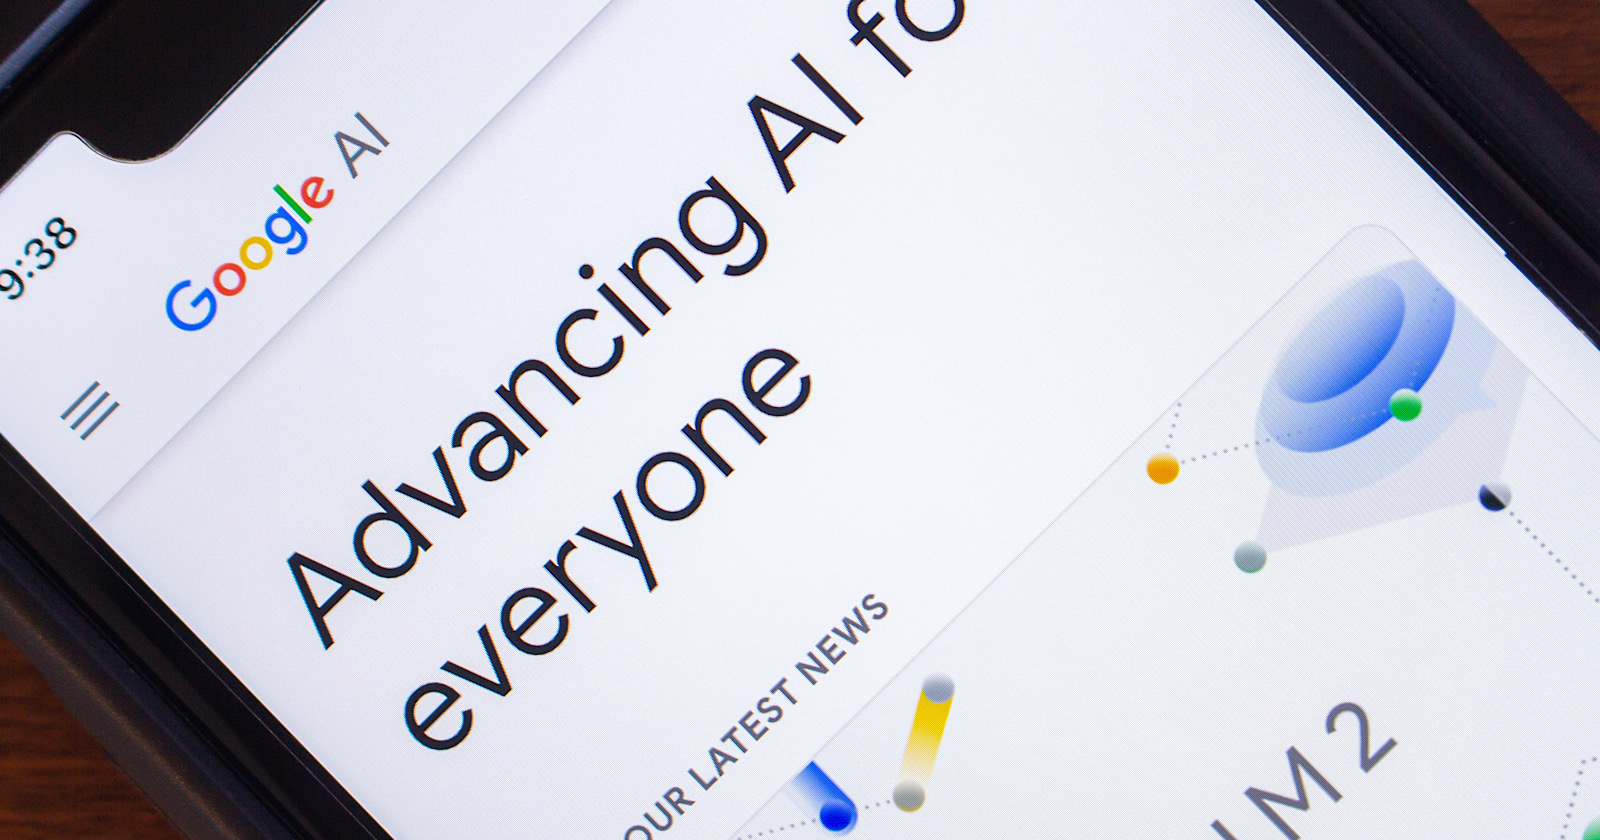 Google Rolls Out AI Search Upgrades Focused On Education